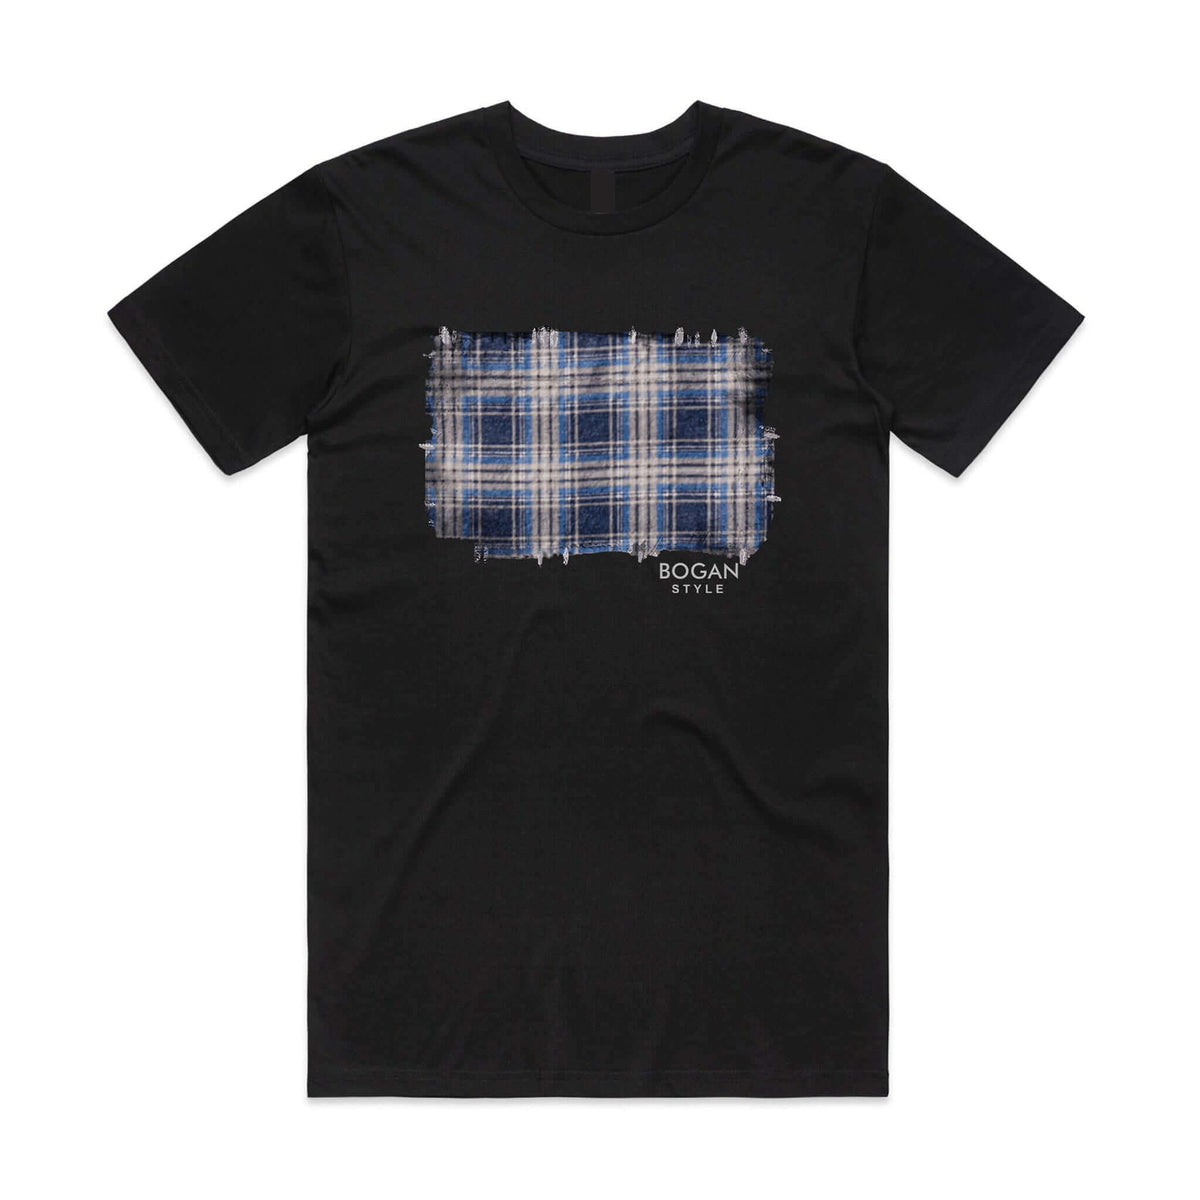 Men's black t shirt with flanno graphic design on the front